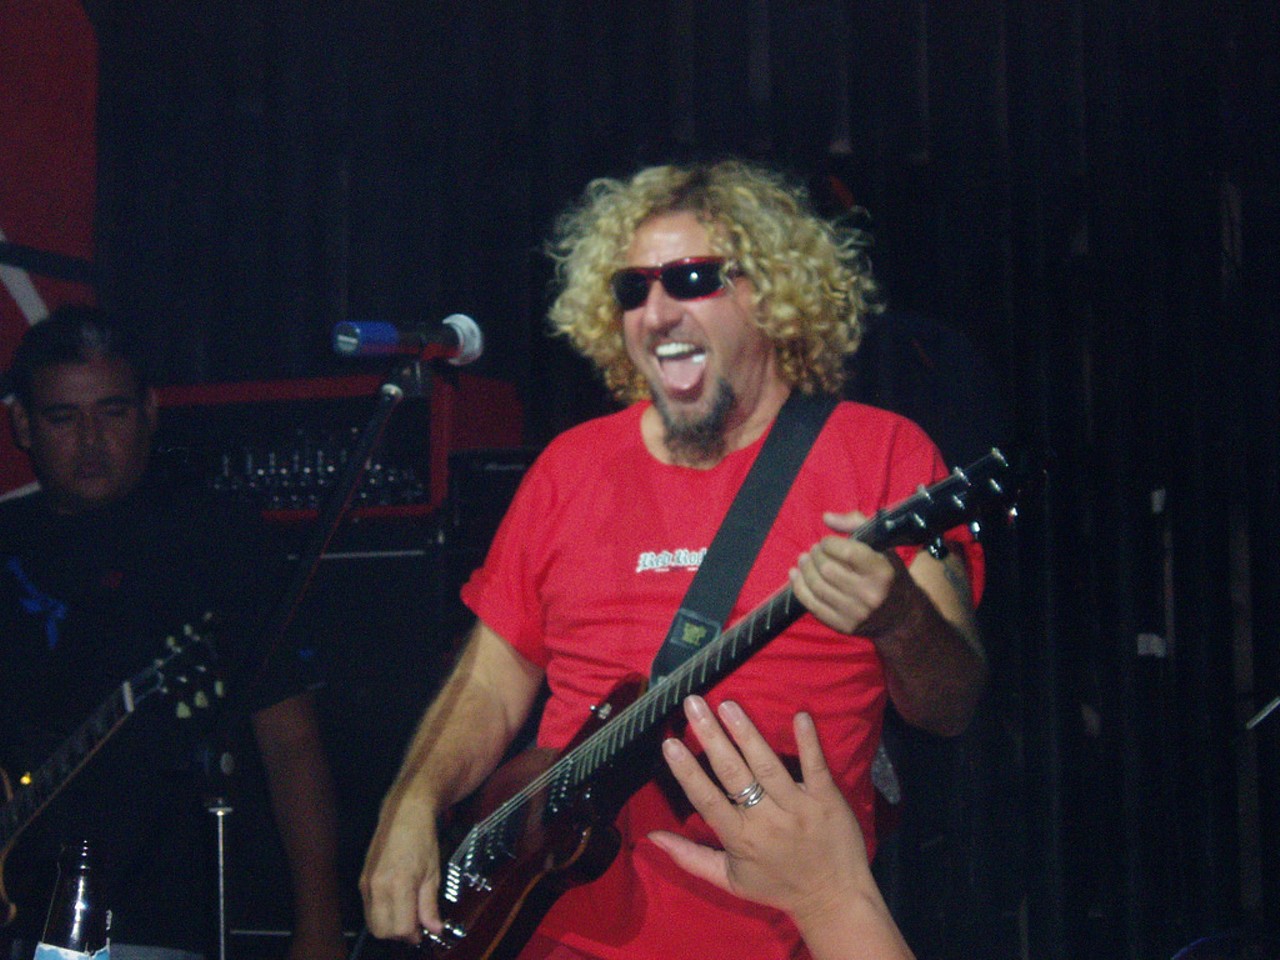 Listen to the Red Rocker
Sammy Hagar loves us so much (and we love him so much) that he might as well be from St. Louis. That is a high honor. Celebrating rocktober with the the Red Rocker just feels right.
Photo courtesy of Simon Davidson / Flickr